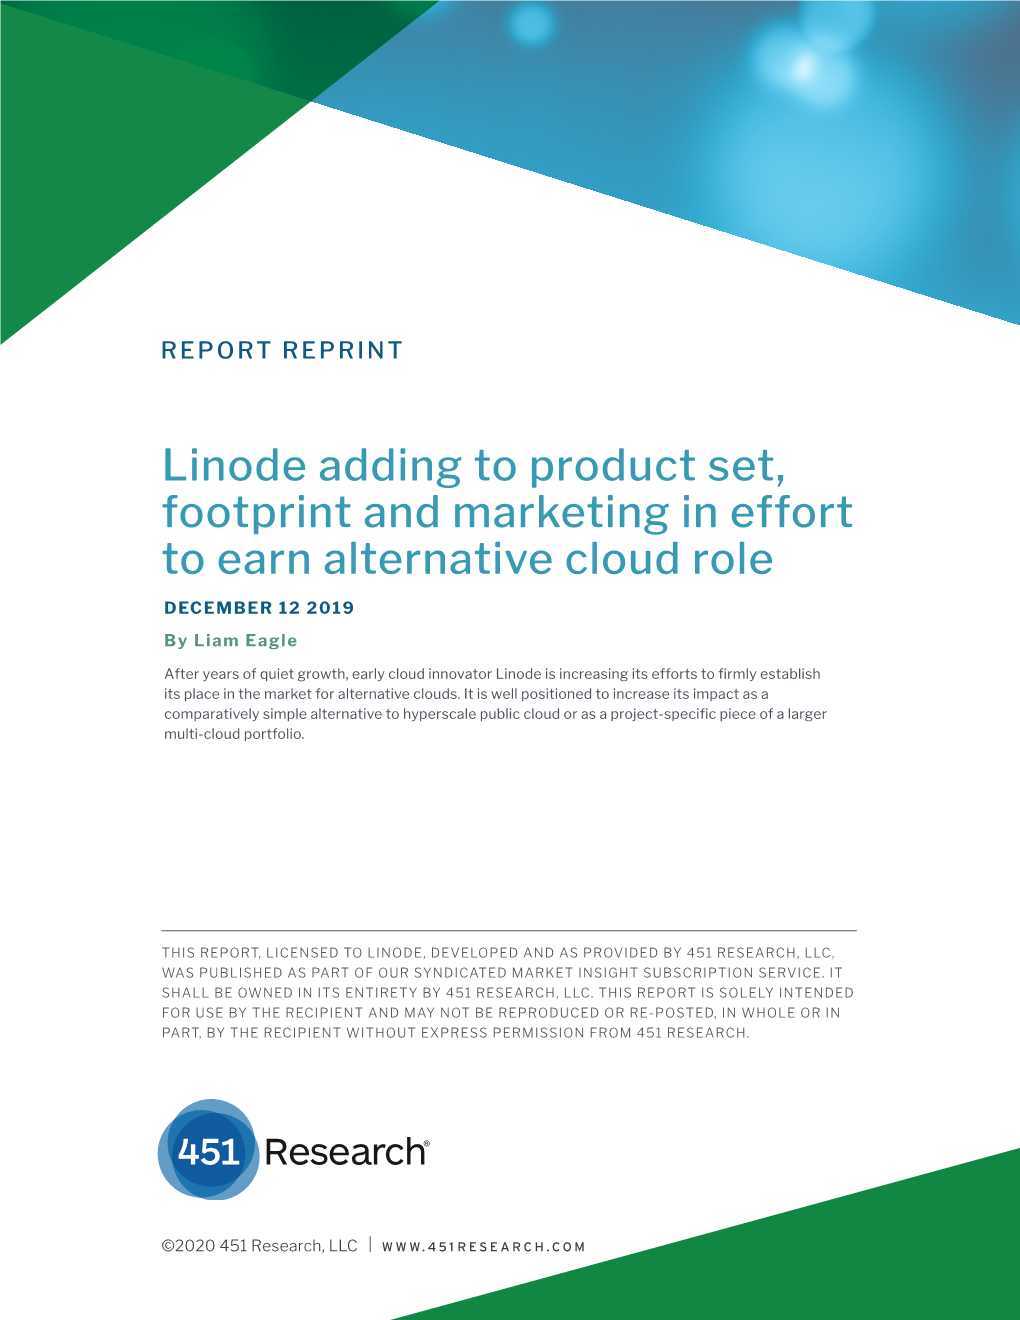 Linode Adding to Product Set, Footprint and Marketing in Effort to Earn Alternative Cloud Role